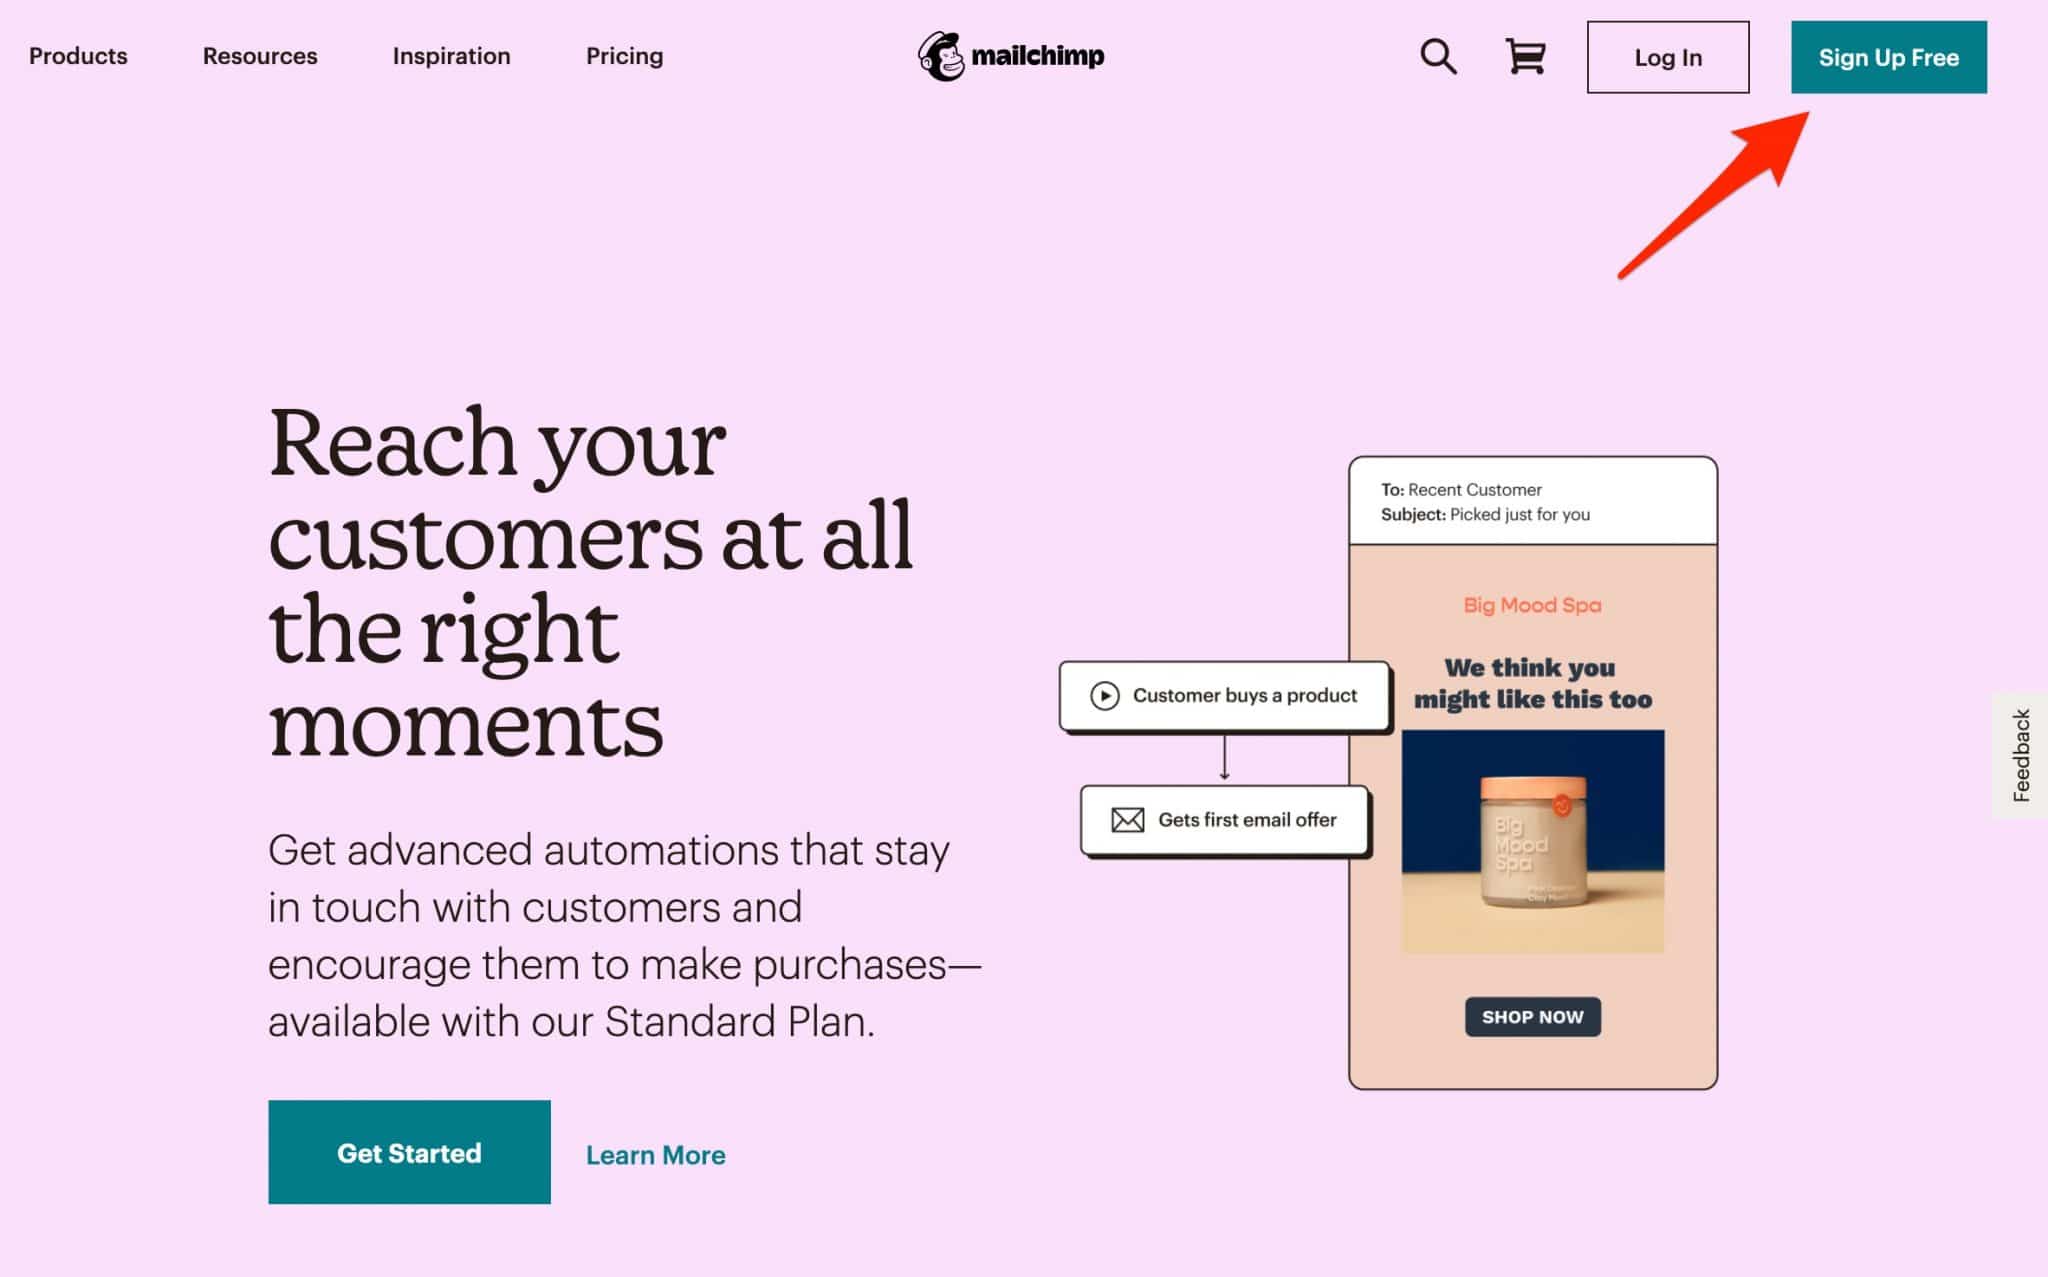 Sign Up Free button on Mailchimp's website.